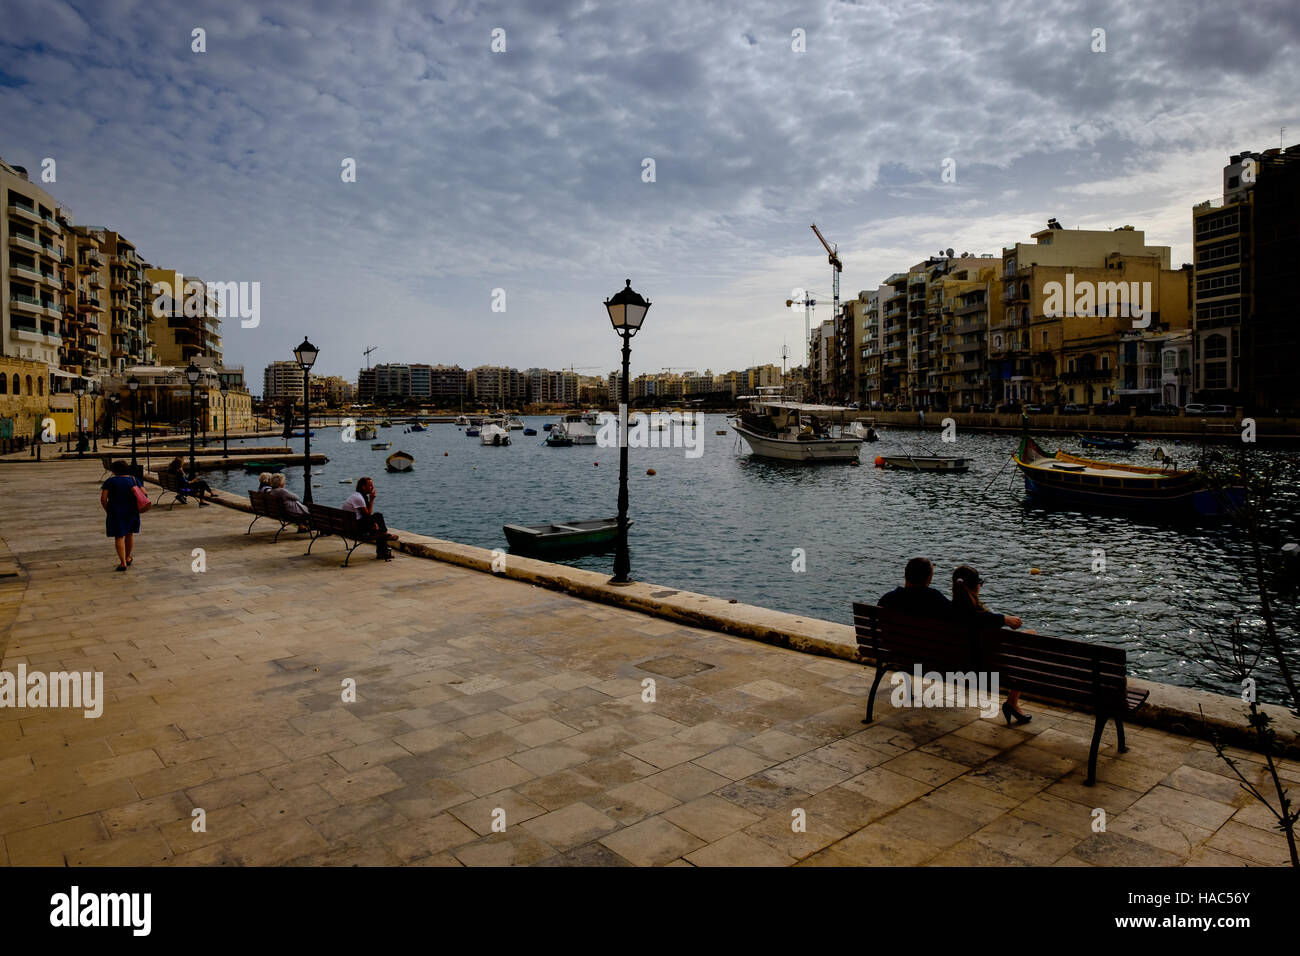 A view of St. Julian's Bay in Malta. Stock Photo